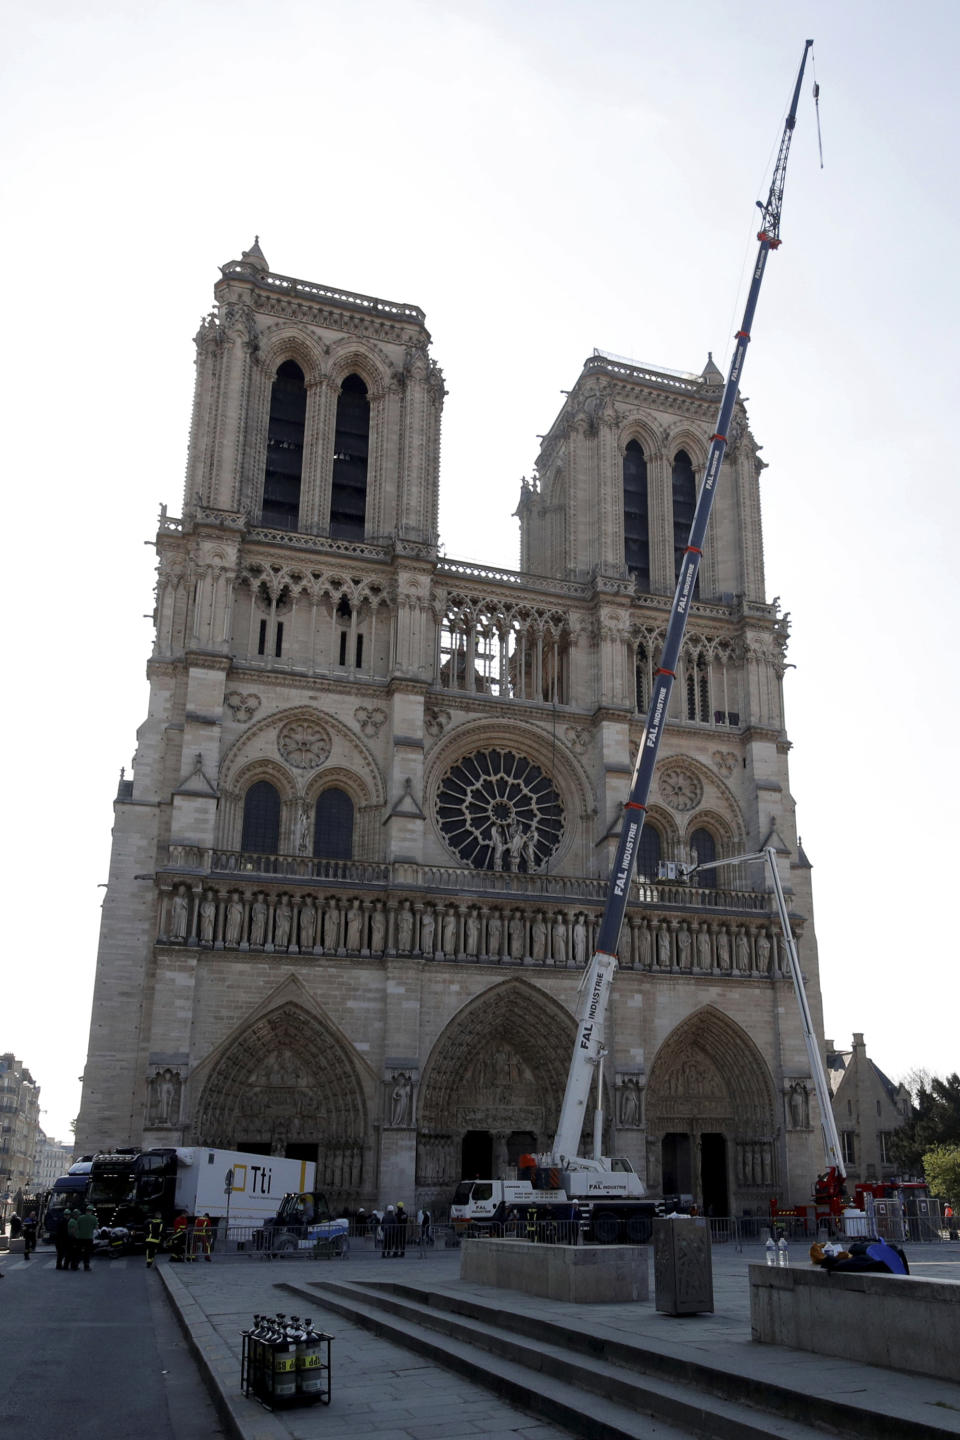 A crane works at Notre-Dame cathedral in Paris, Friday, April 19, 2019. Rebuilding Notre Dame, the 800-year-old Paris cathedral devastated by fire this week, will cost billions of dollars as architects, historians and artisans work to preserve the medieval landmark. (Philippe Wojazer/Pool via AP)